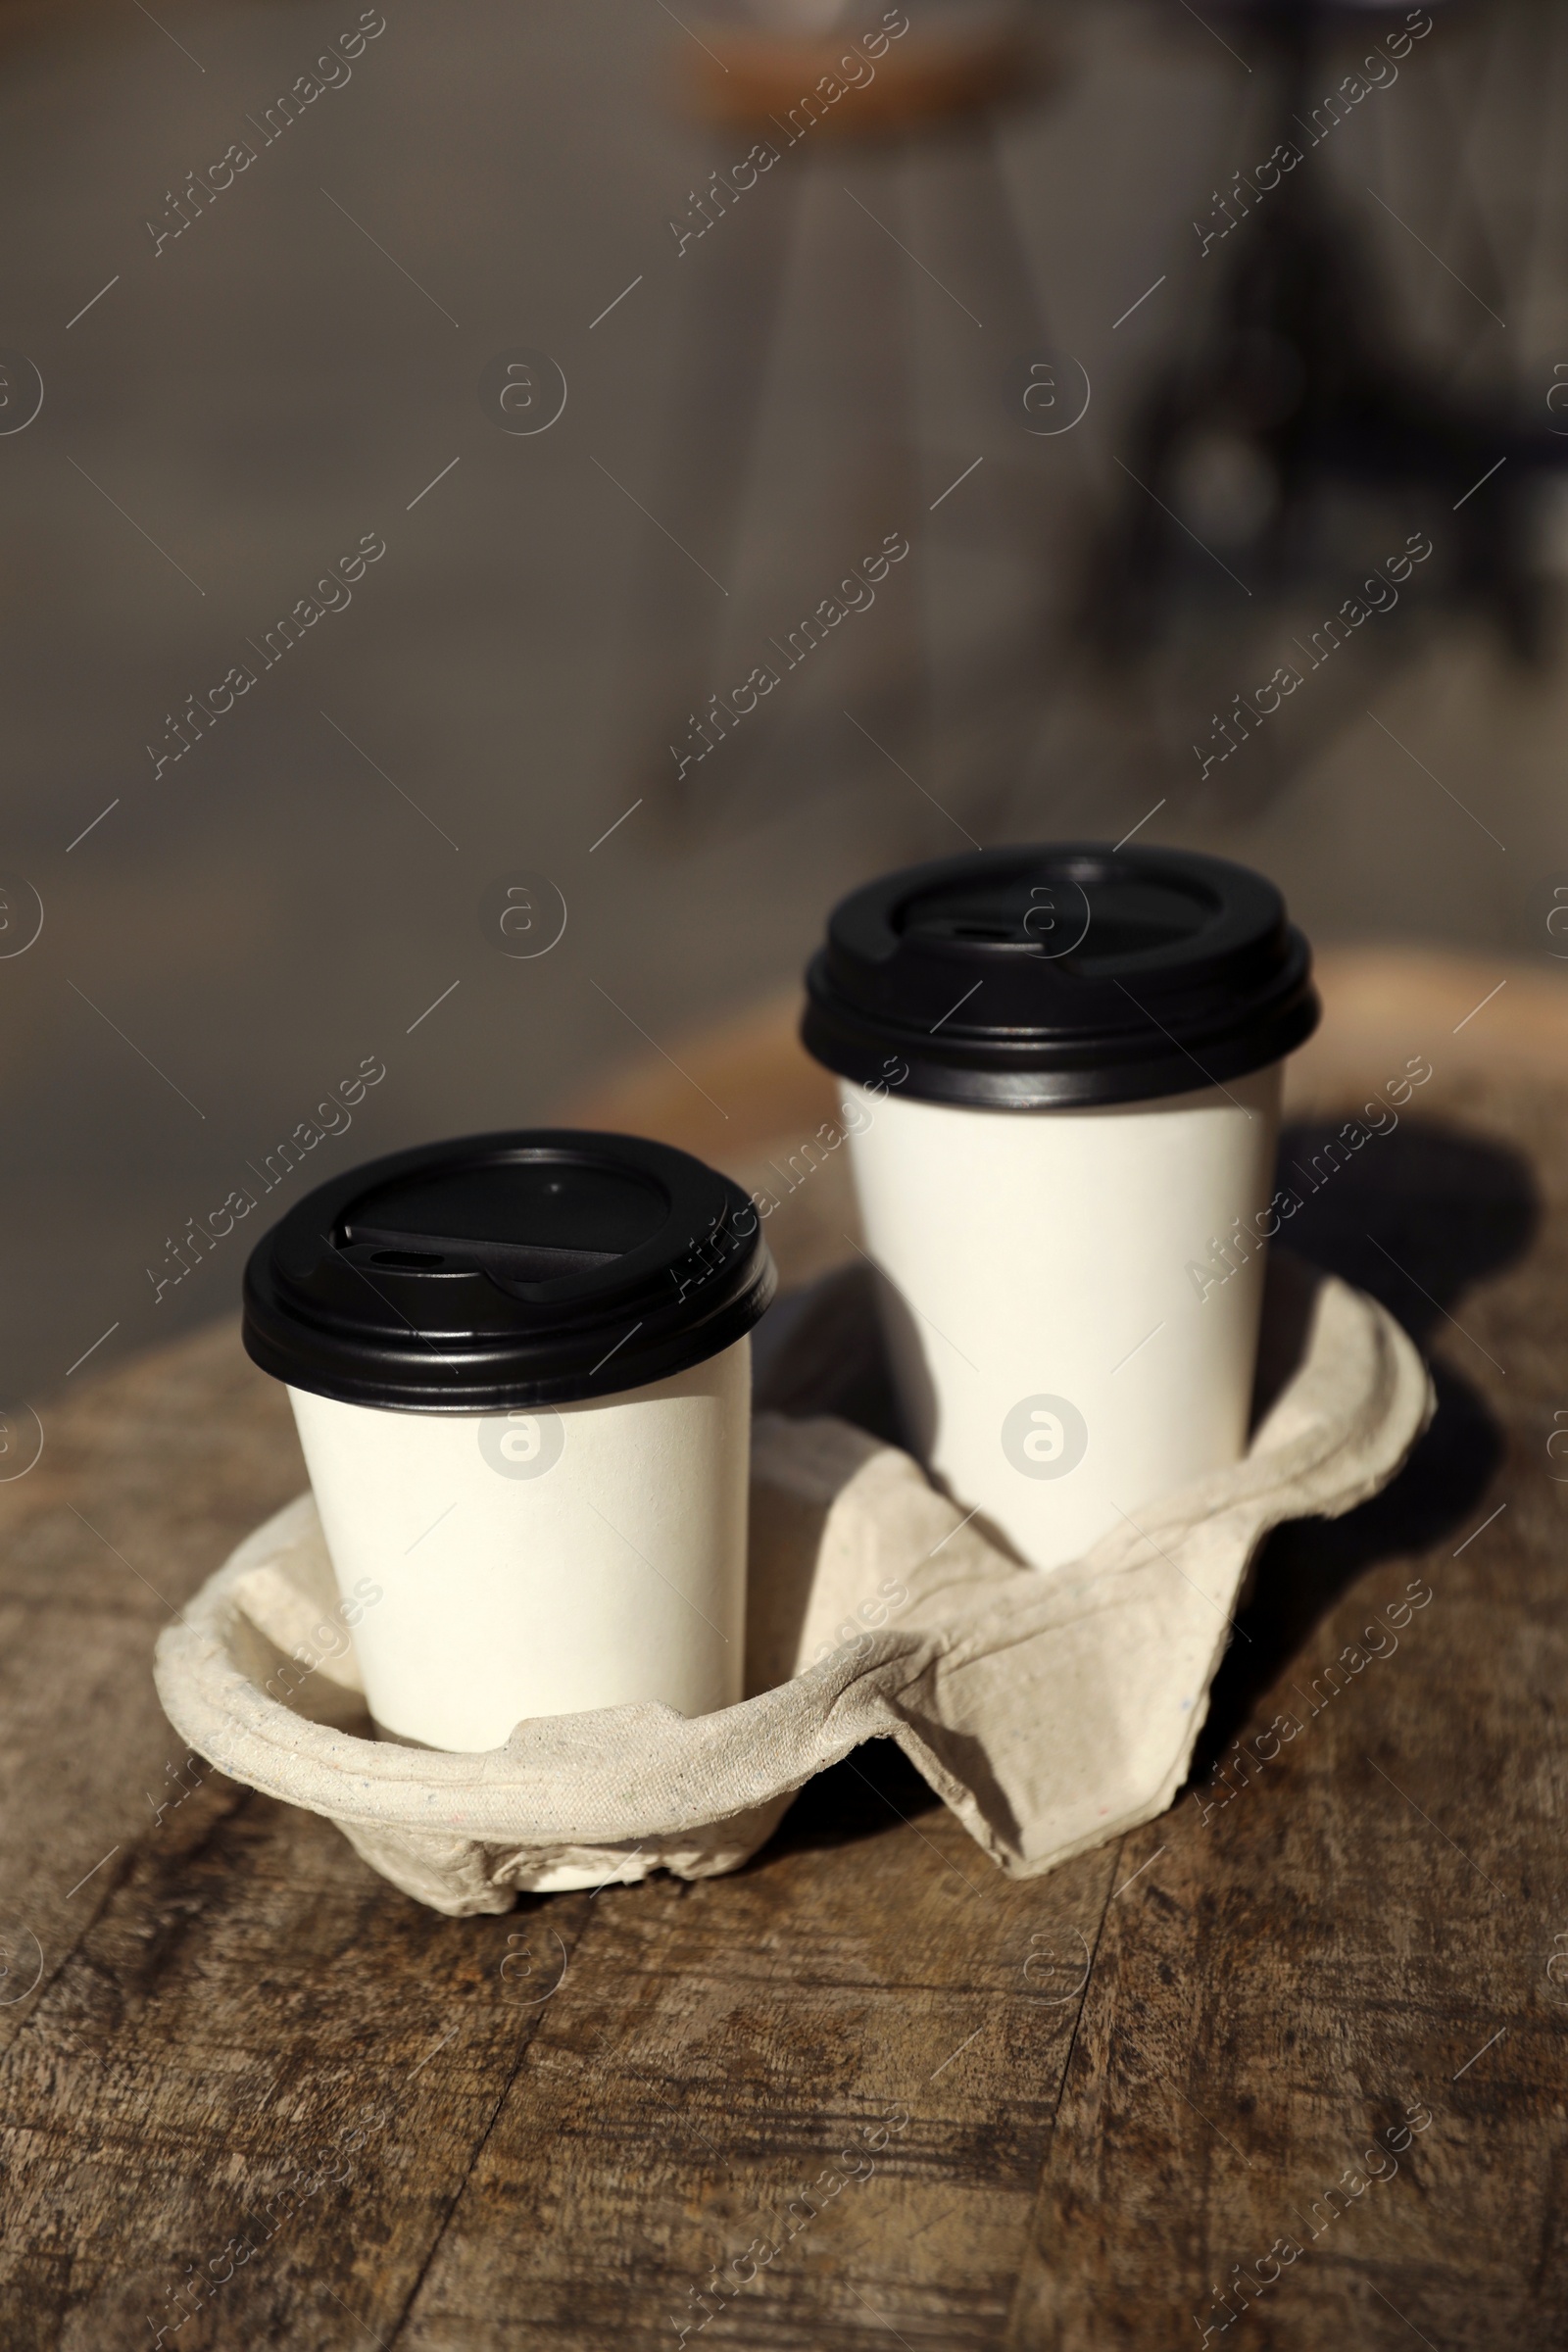 Photo of Cardboard takeaway coffee cups with plastic lids and holder on wooden table in city